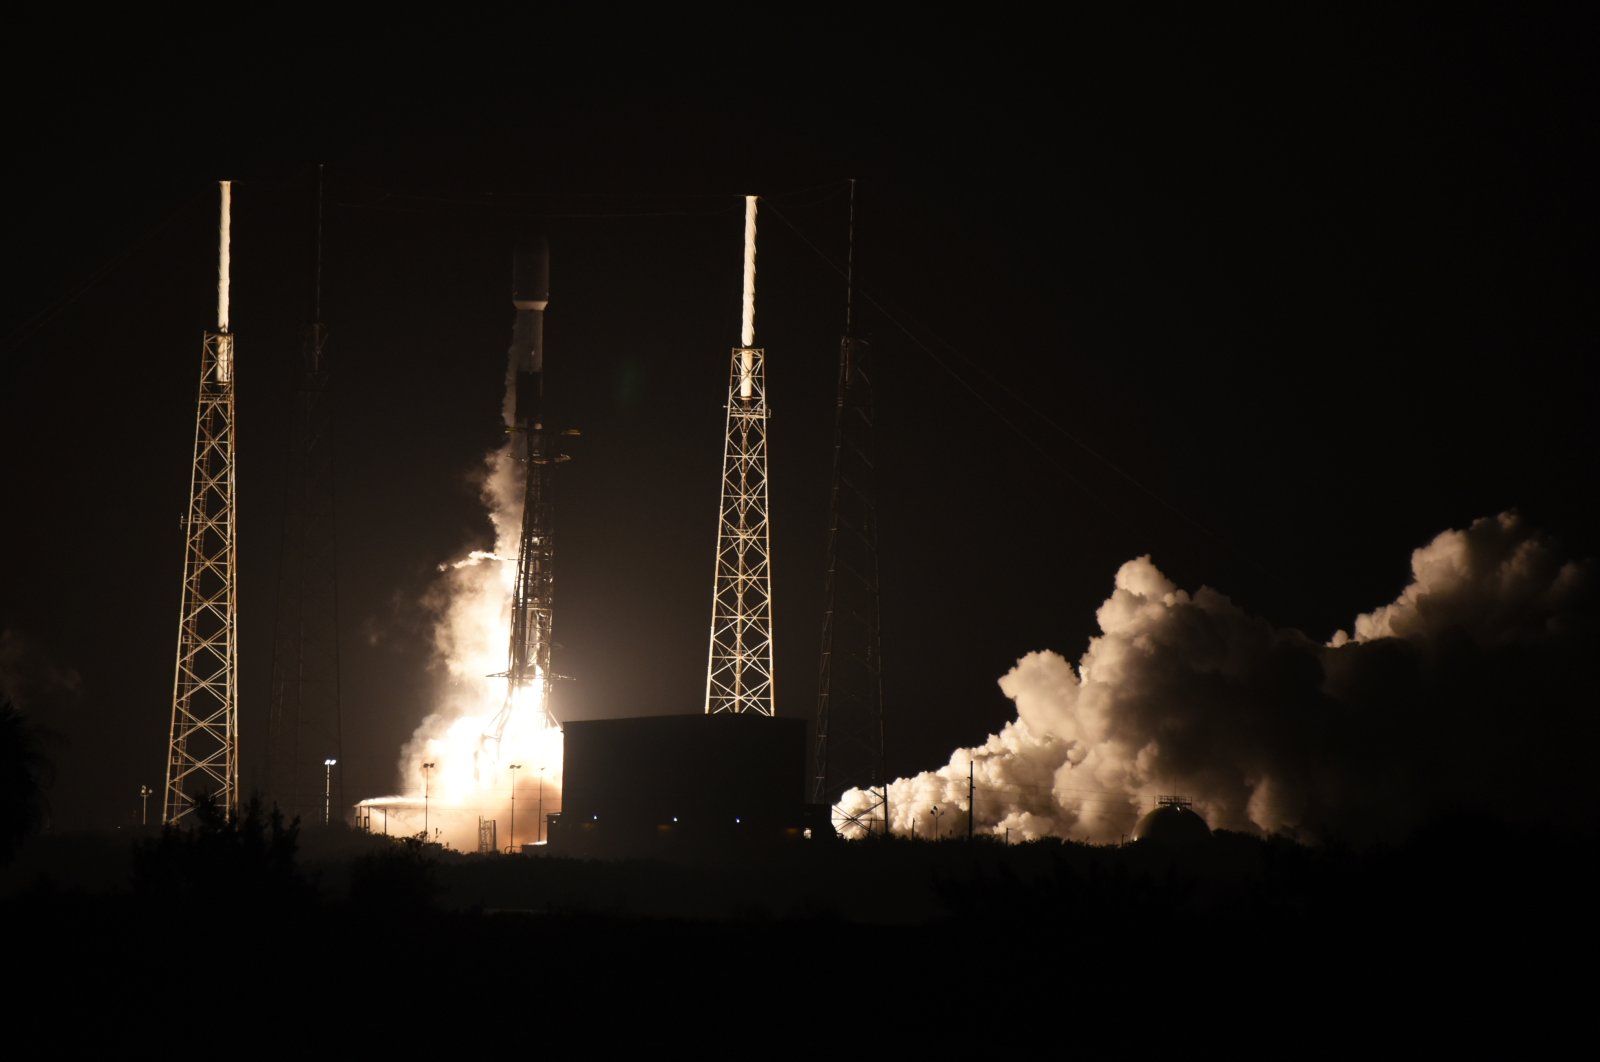 Türksat 5B is seen during its launch at the Cape Canaveral Space Force Station in Florida, U.S., Dec. 19, 2021. (AA Photo)